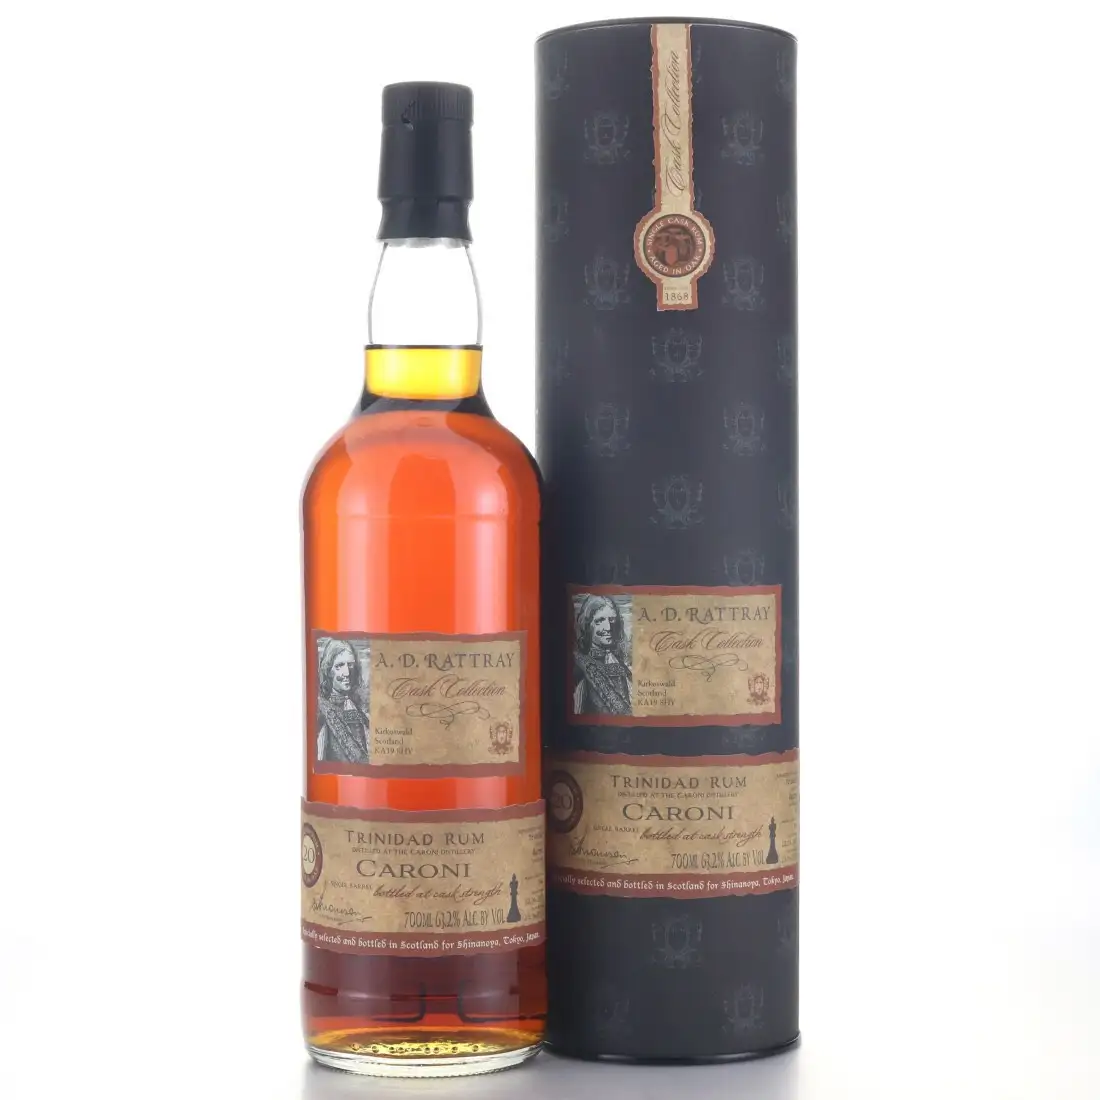 Image of the front of the bottle of the rum Cask Collection Shinanoya HTR